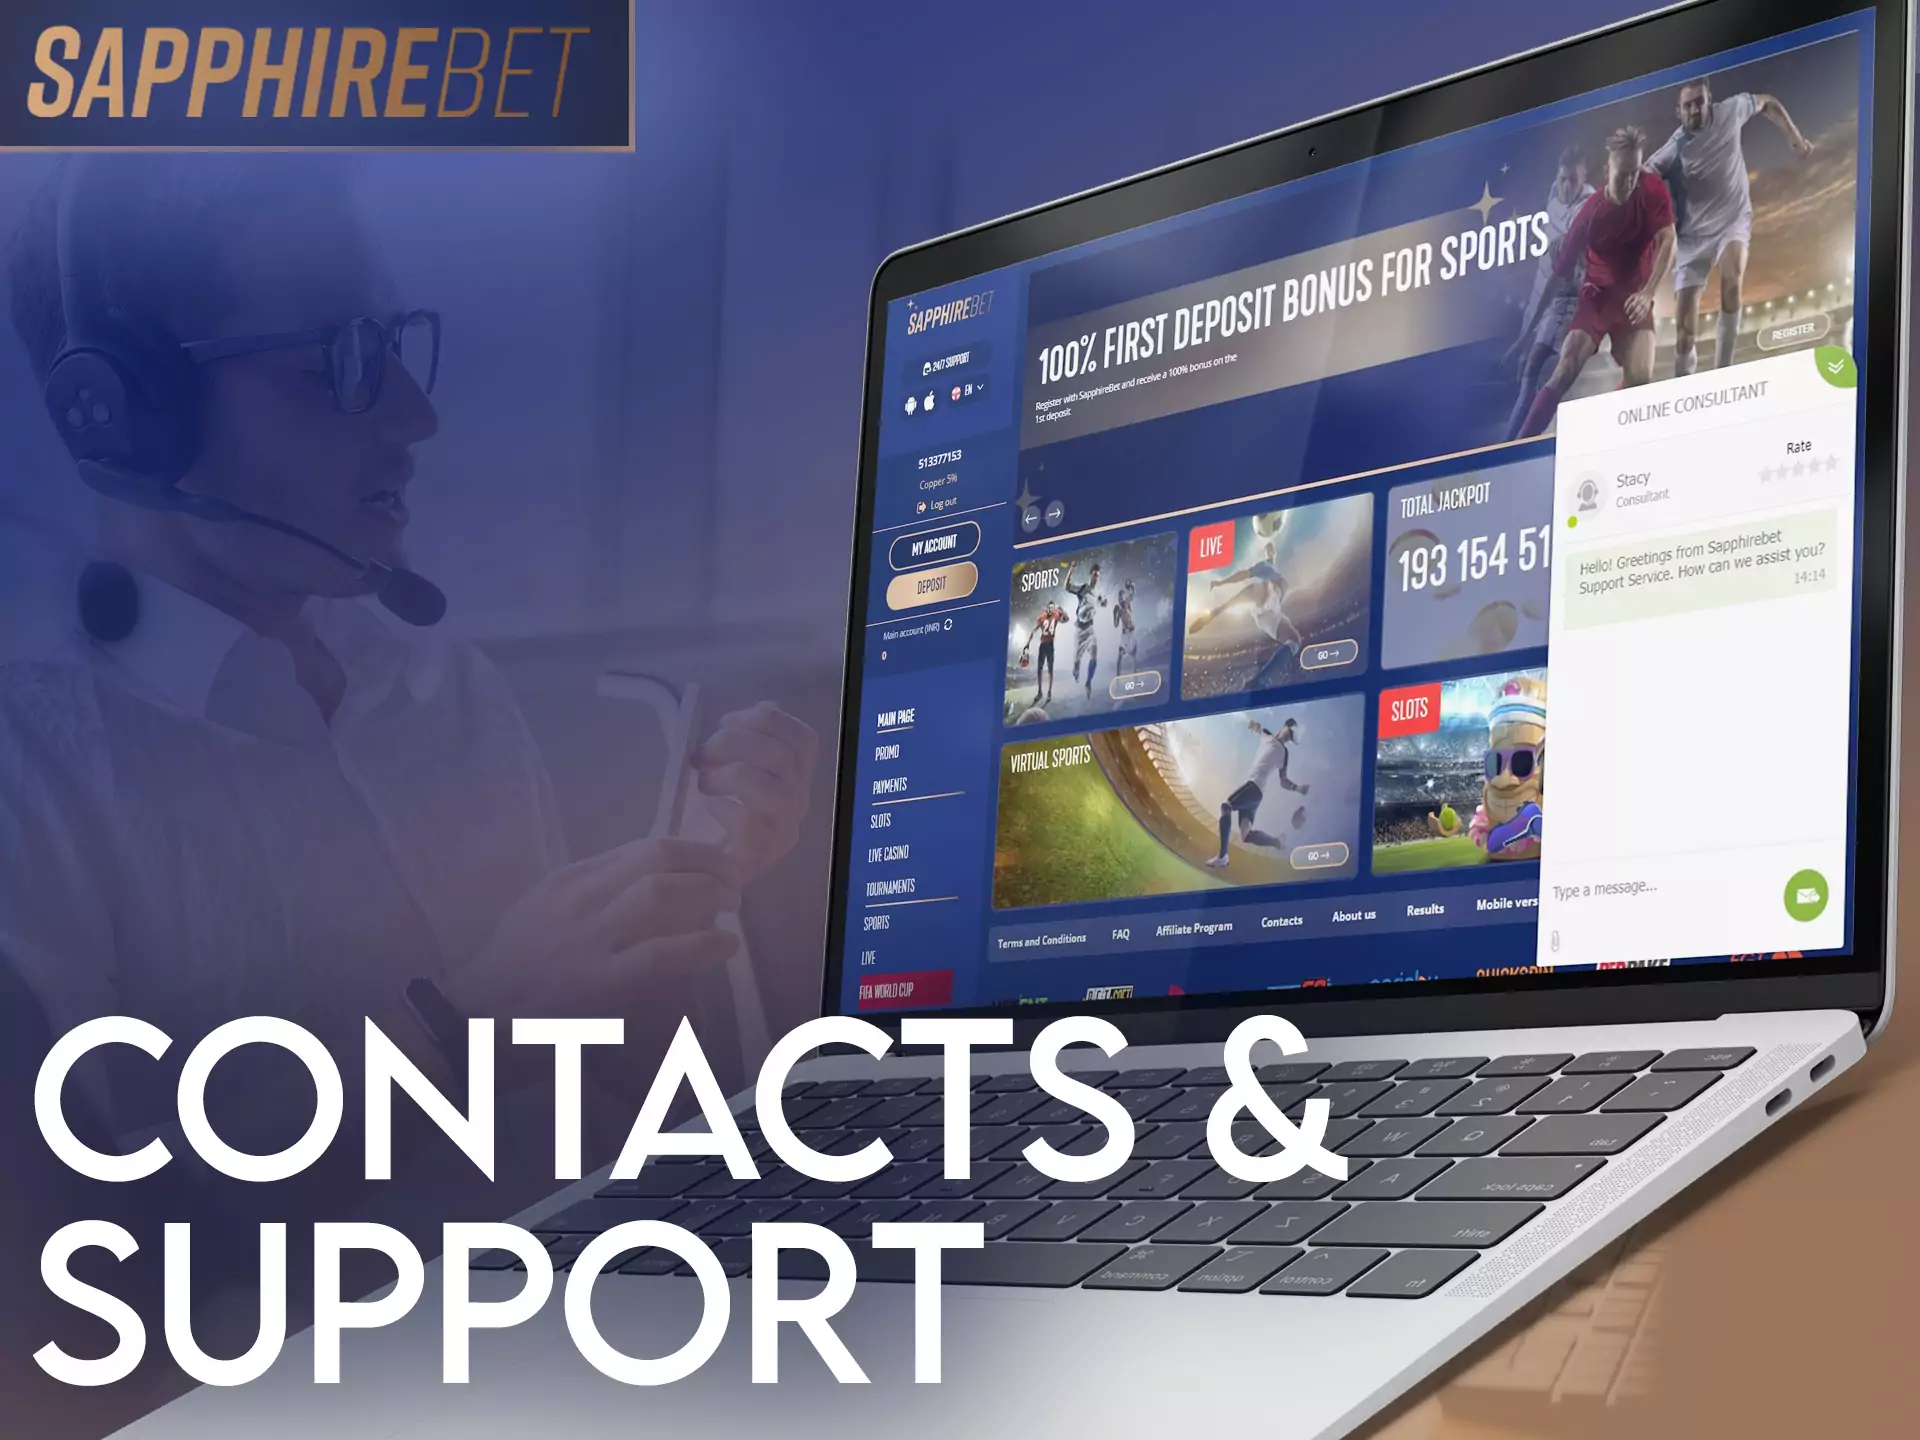 The Sapphirebet support staff is ready to help with your questions and situations at any time.